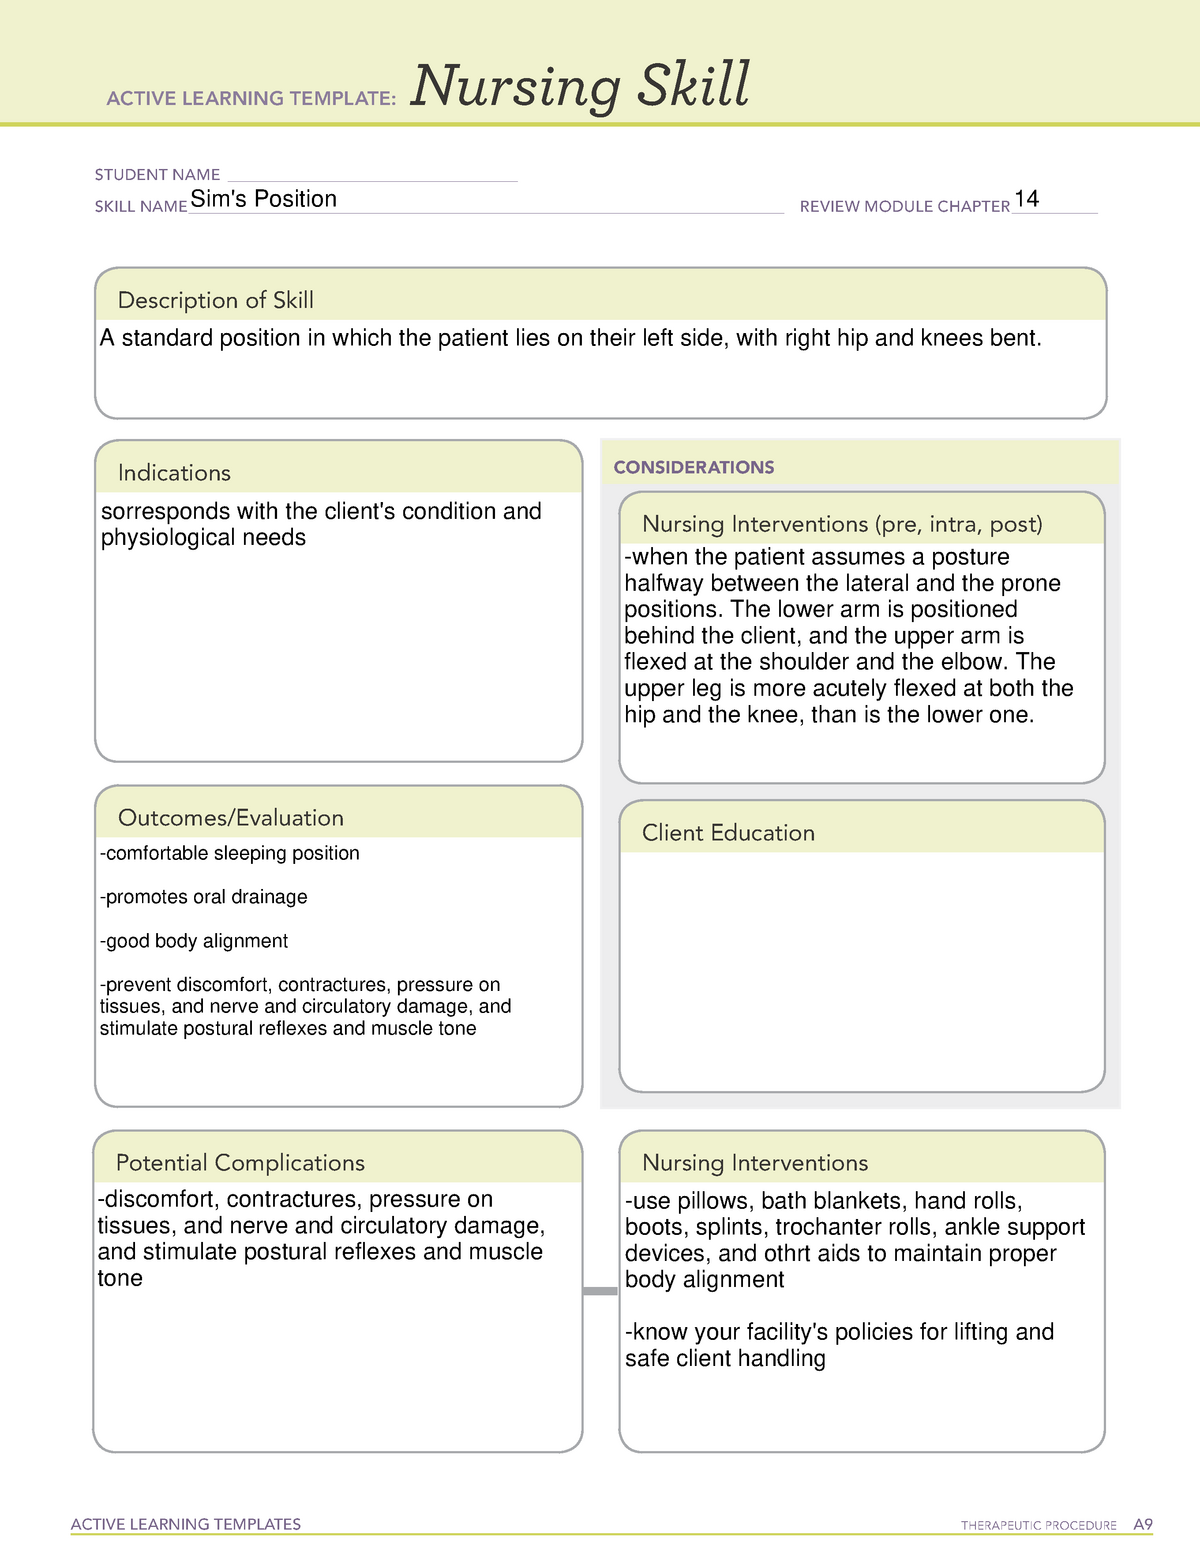 ch-14-sims-position-ati-practice-template-review-material-and-review